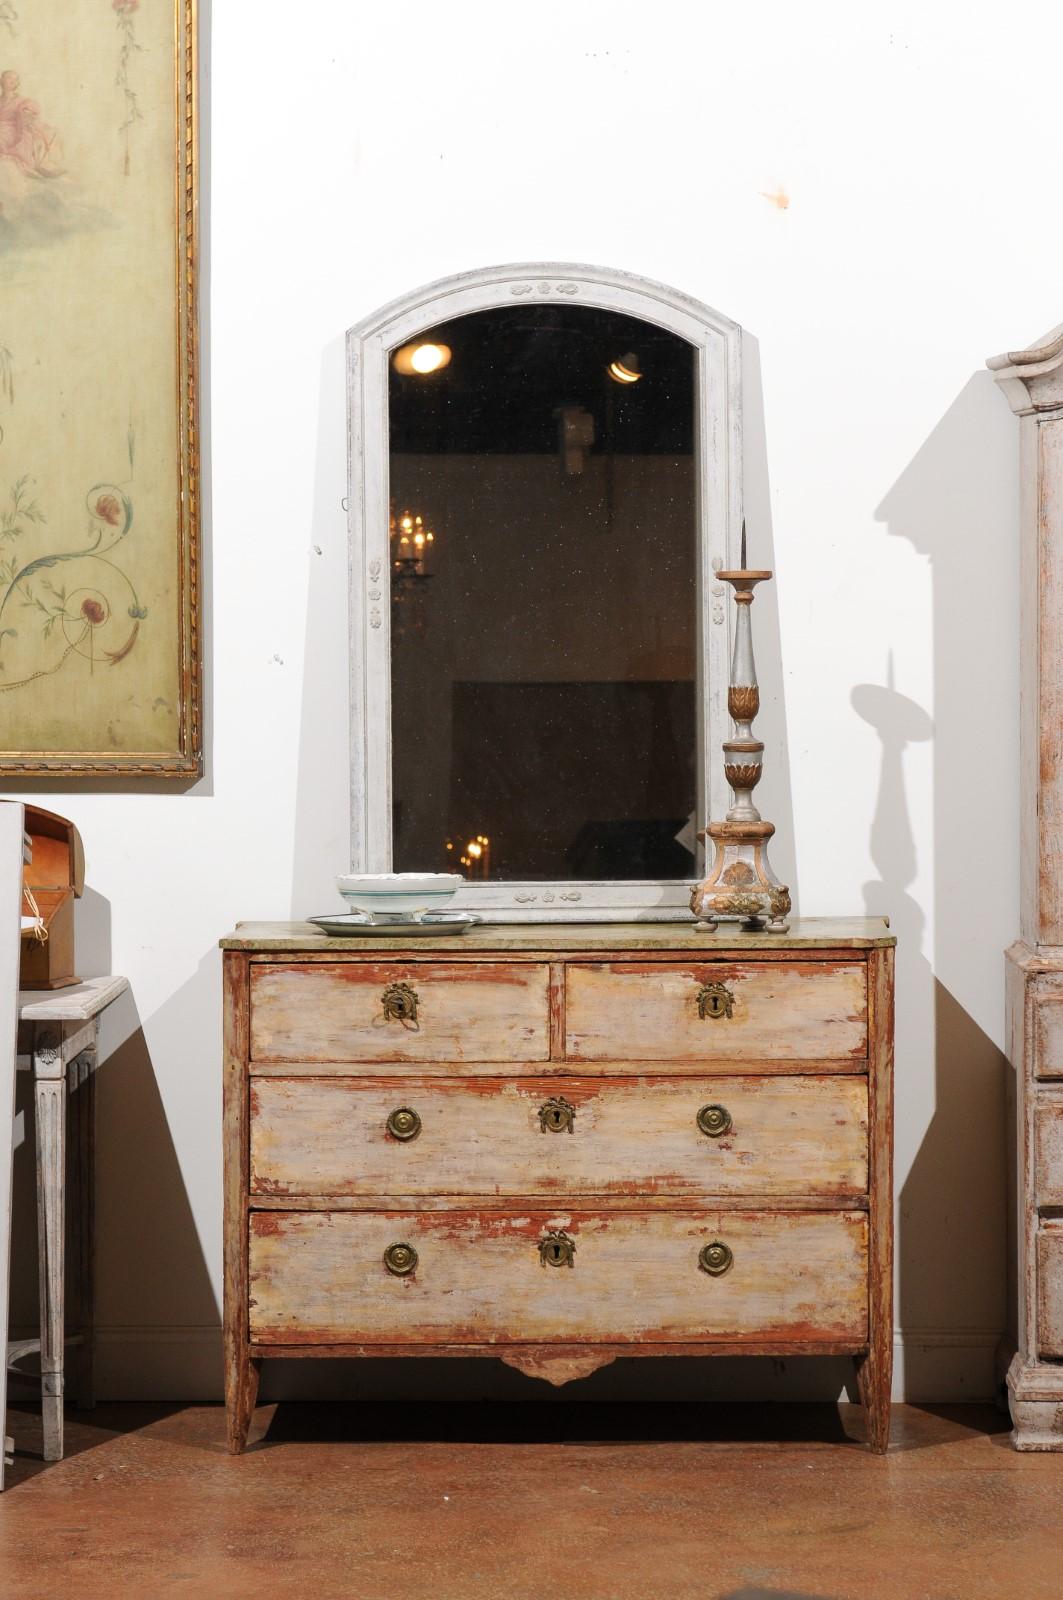 A Swedish Gustavian period four-drawer chest from the late 18th century, with nicely distressed appearance. Created in Sweden during the last quarter of the 18th century, this chest features a rectangular marbleized top with canted corners in the